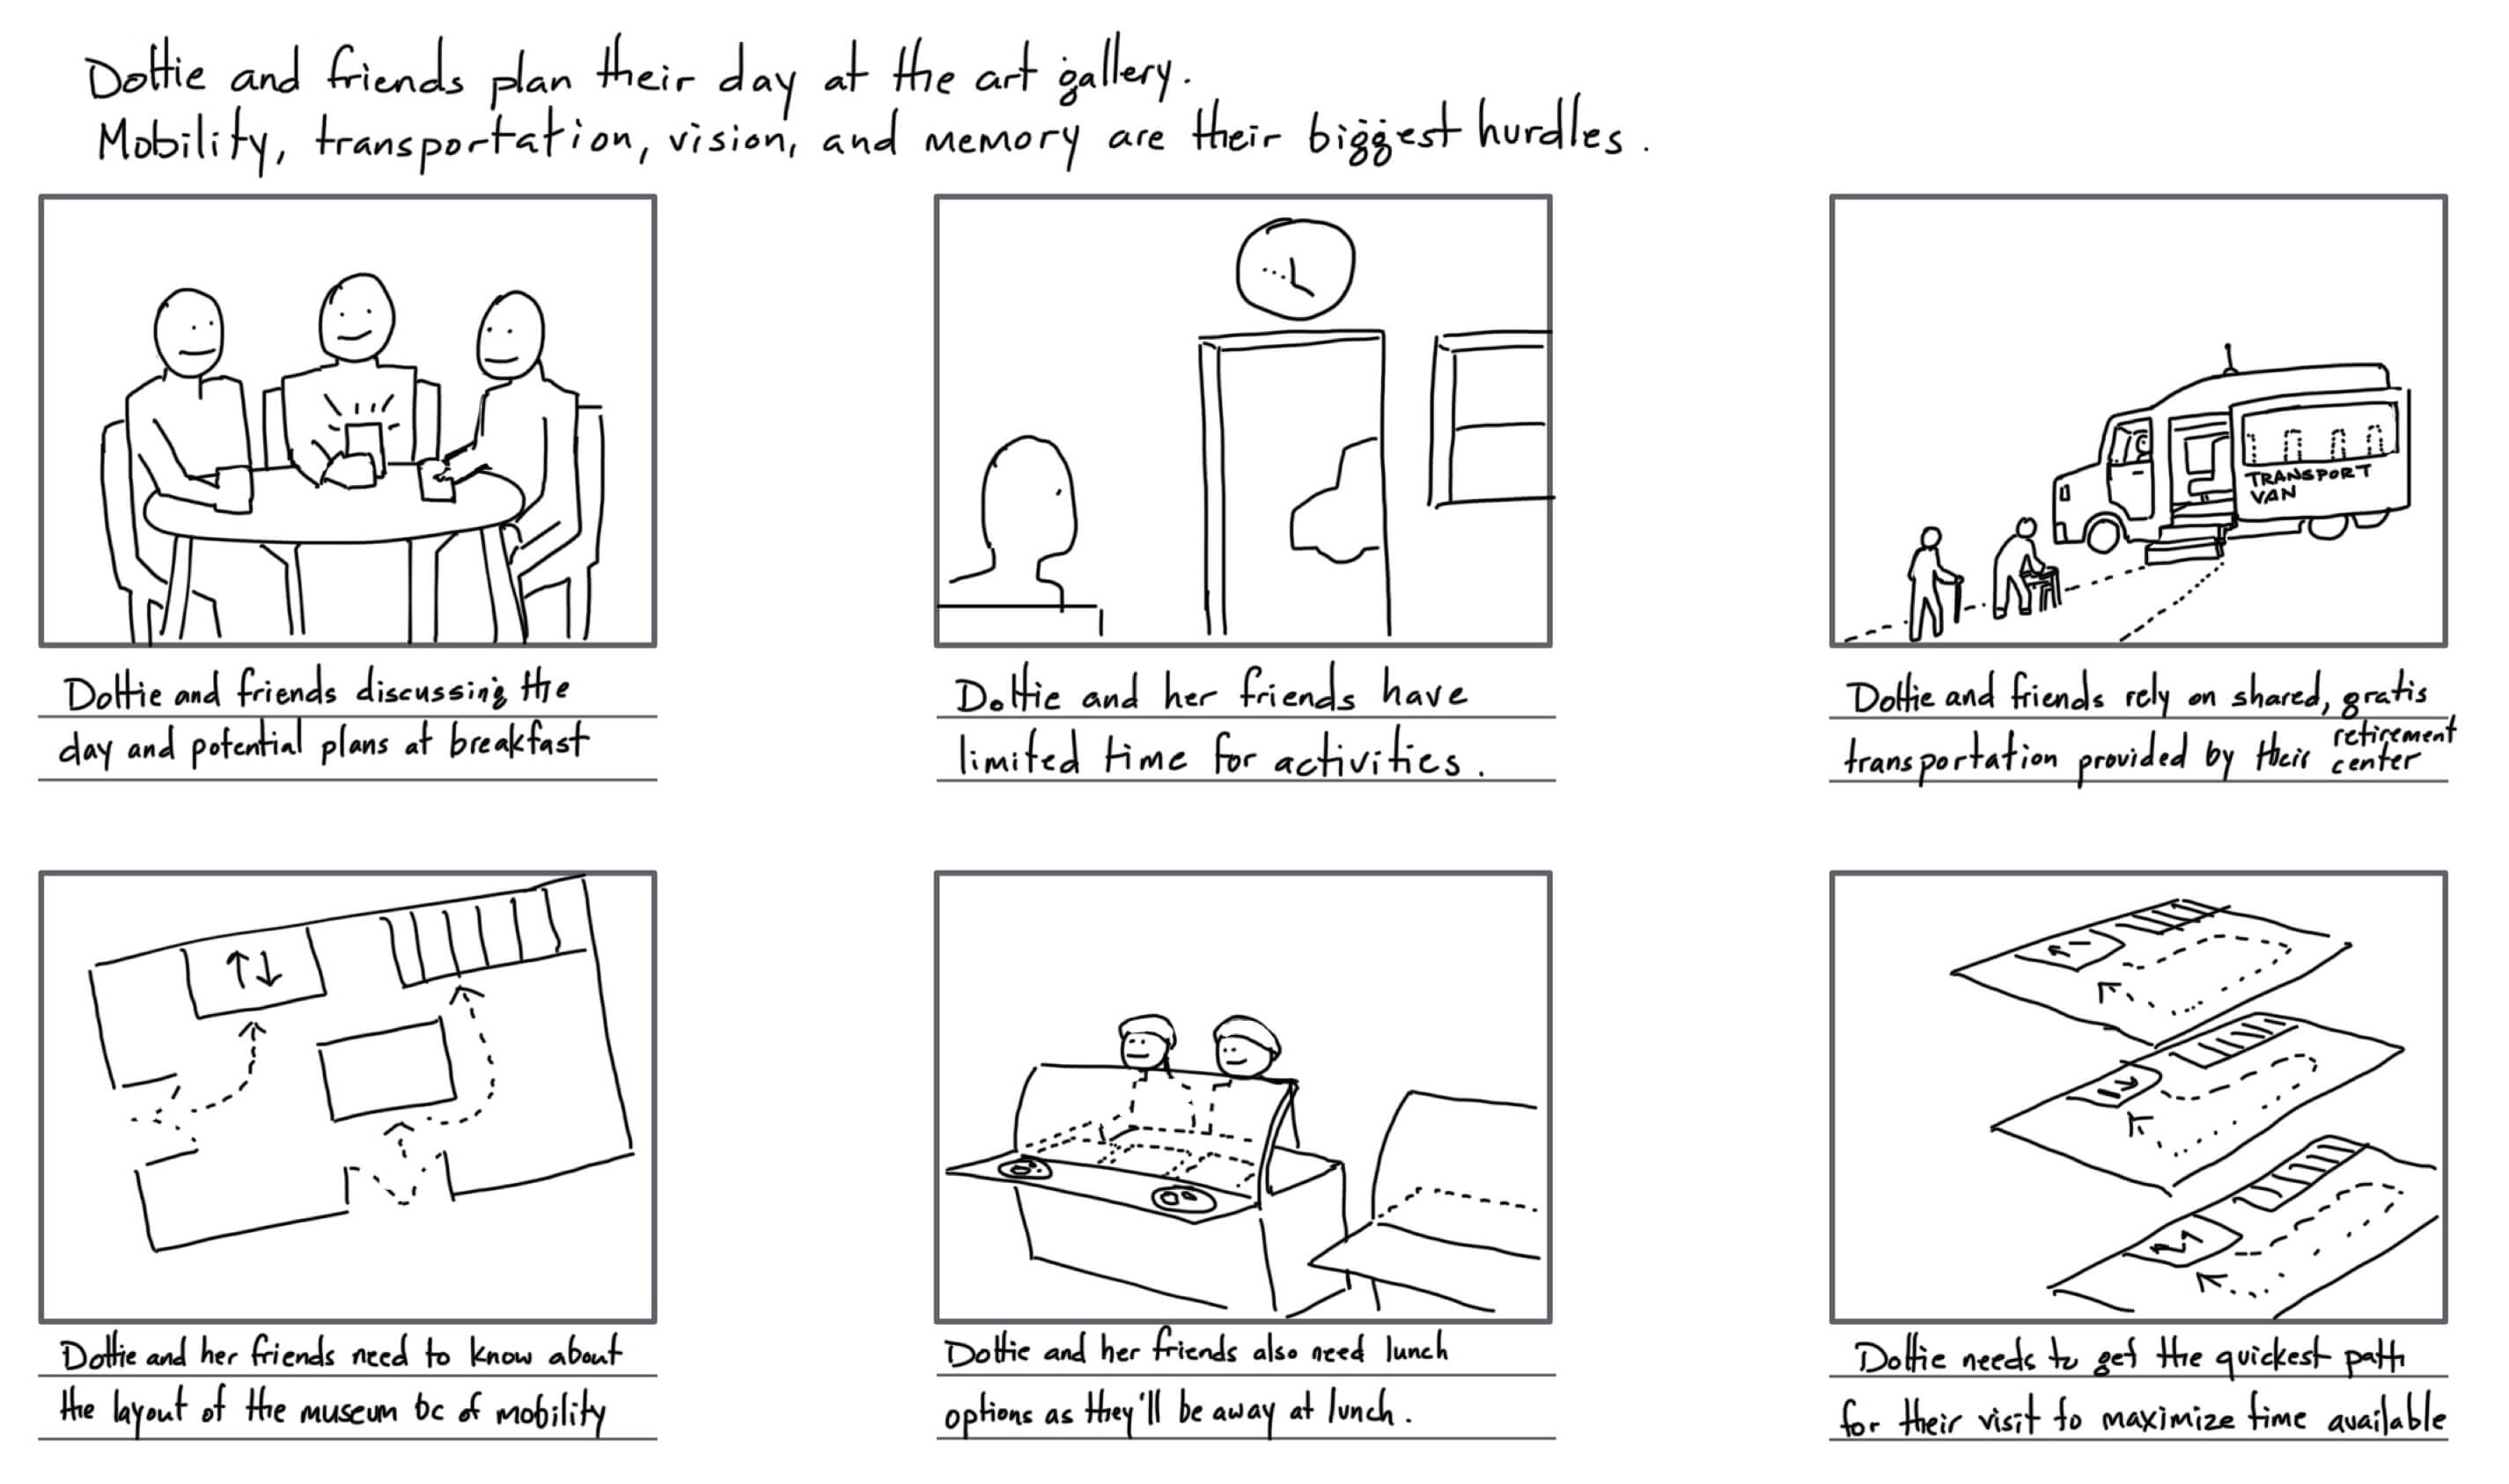 Storyboard created to understand Dotty’s day.